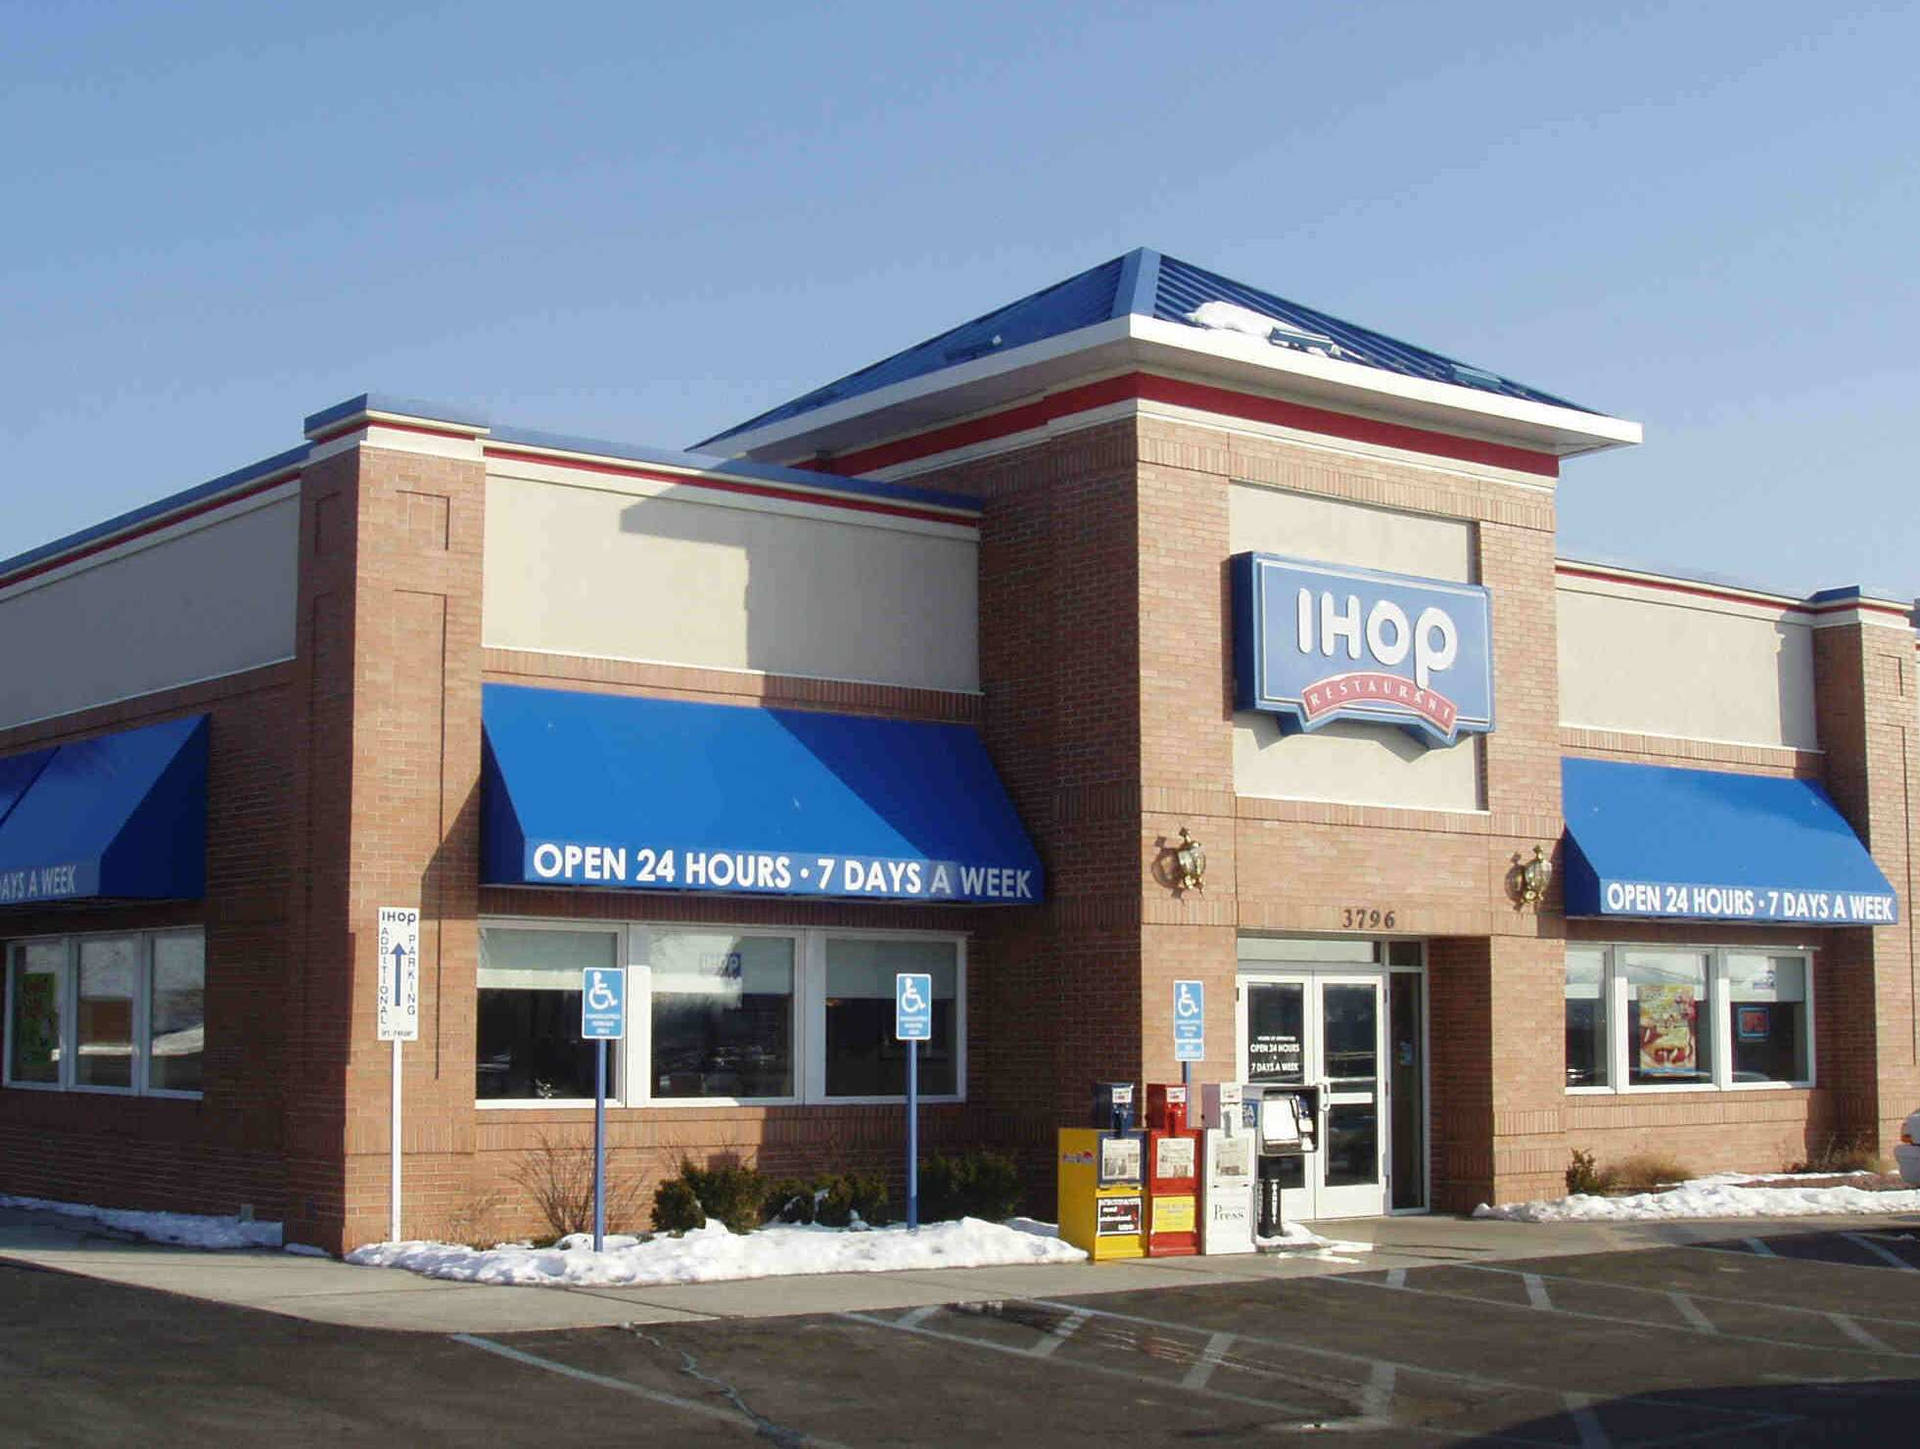 Check out the delicious pancakes at IHOP in Phoenix, Arizona! Wallpaper